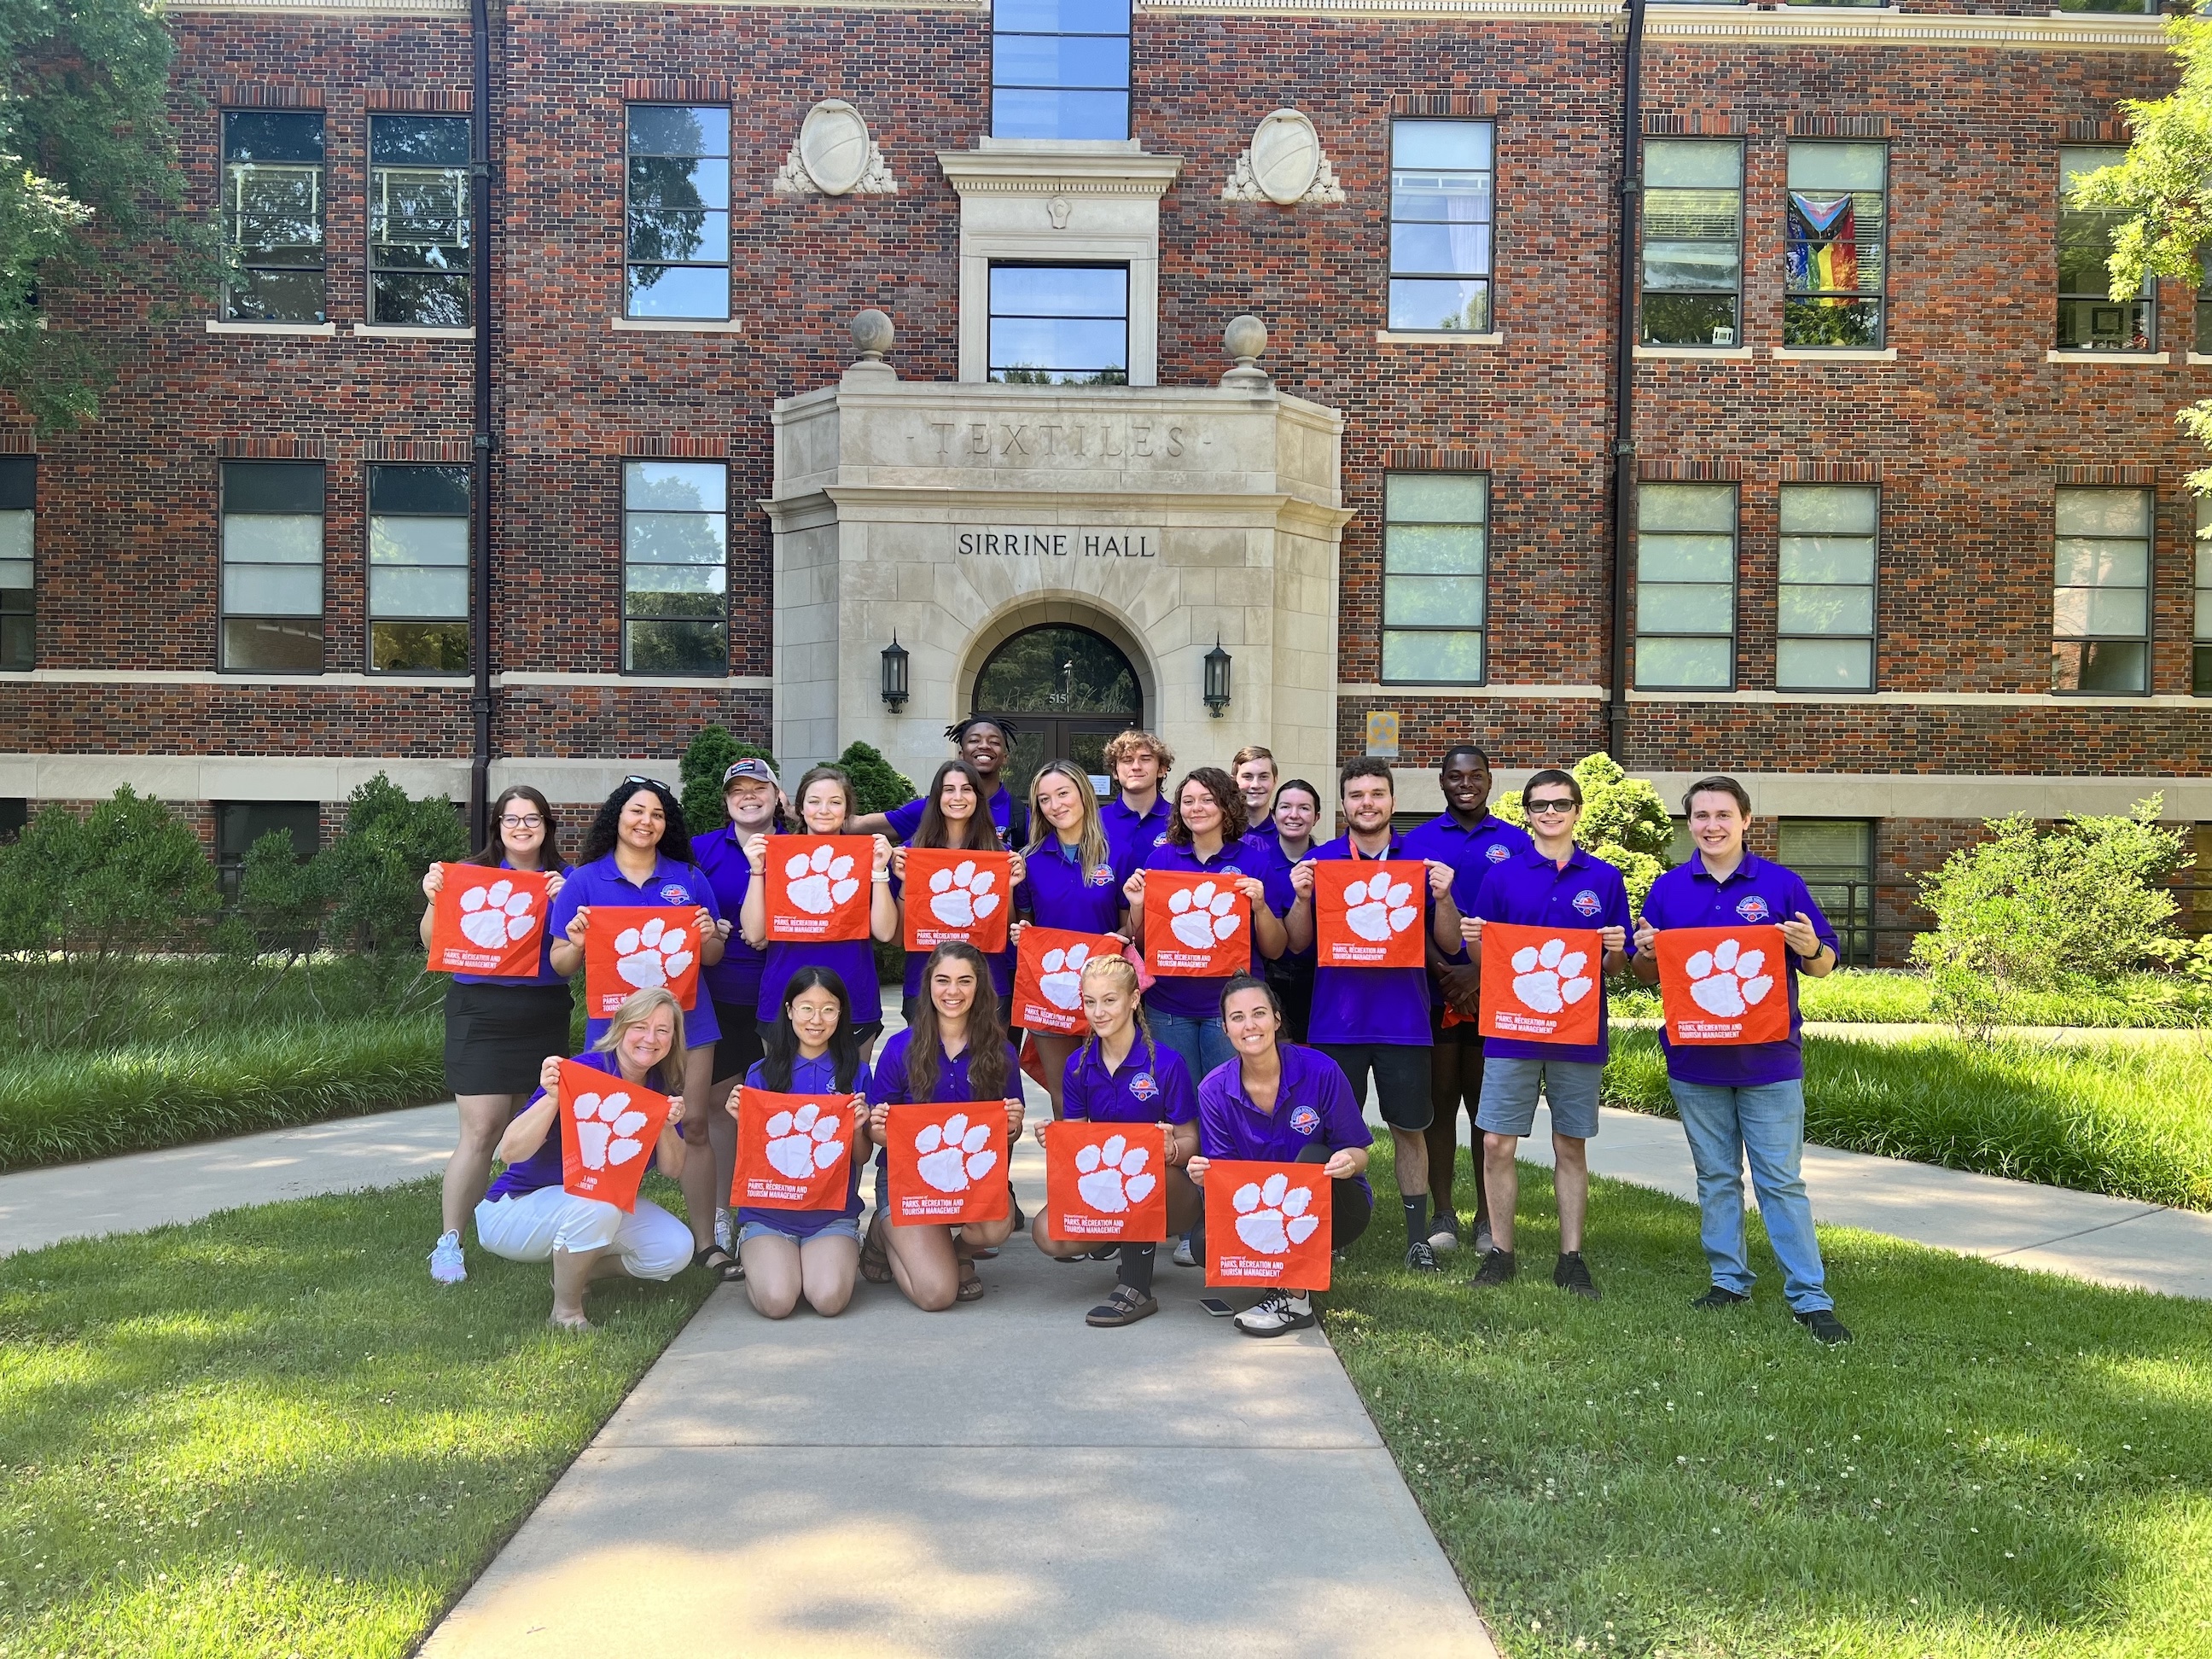 Summer Scholars counselors pose outside Sirrine Hall.